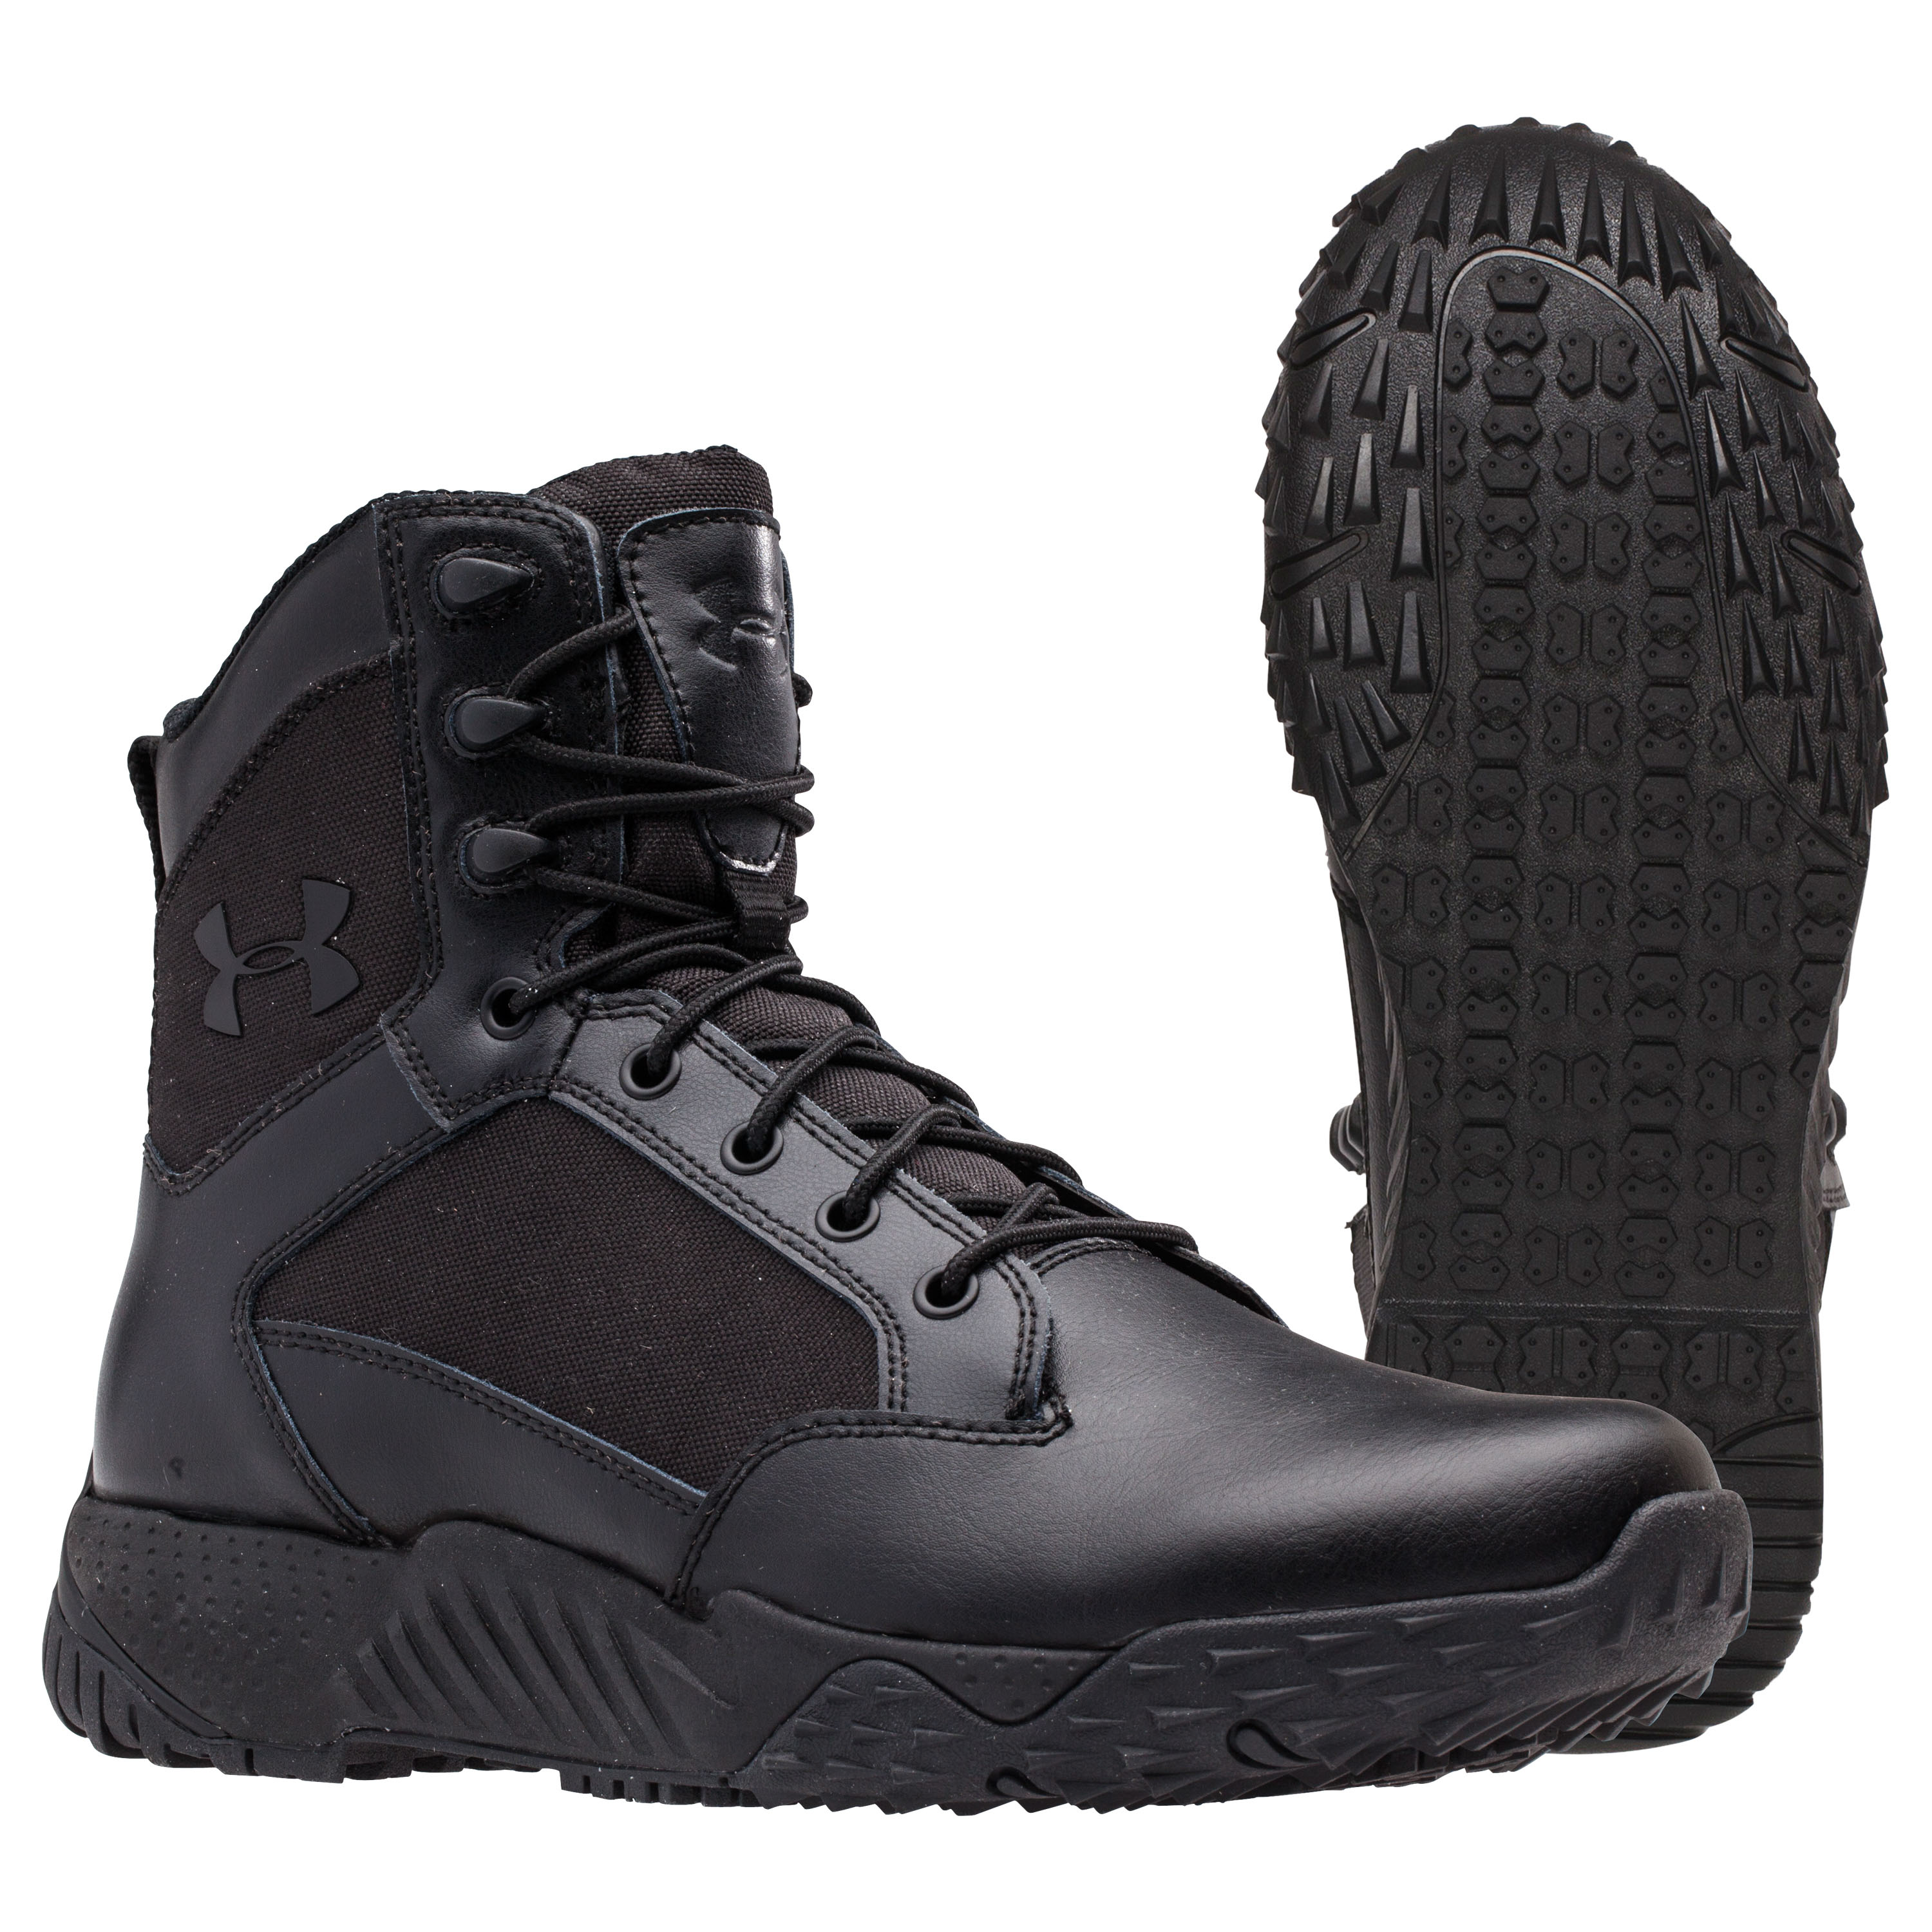 Buy > everyday tactical boots > in stock